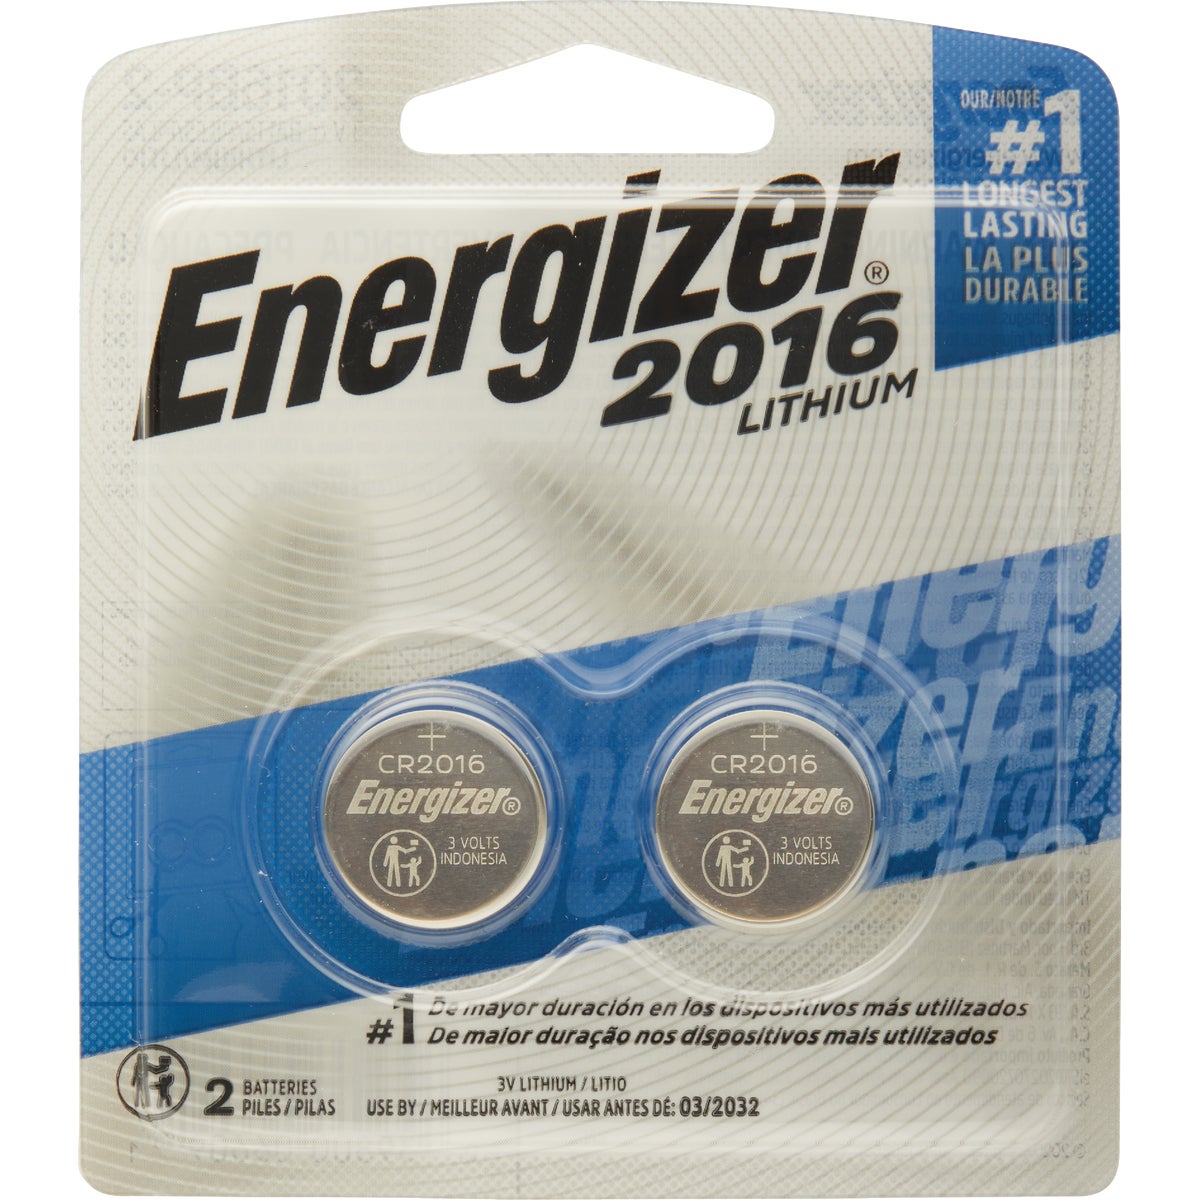 Energizer 2016 Lithium Coin Cell Battery (2-Pack)